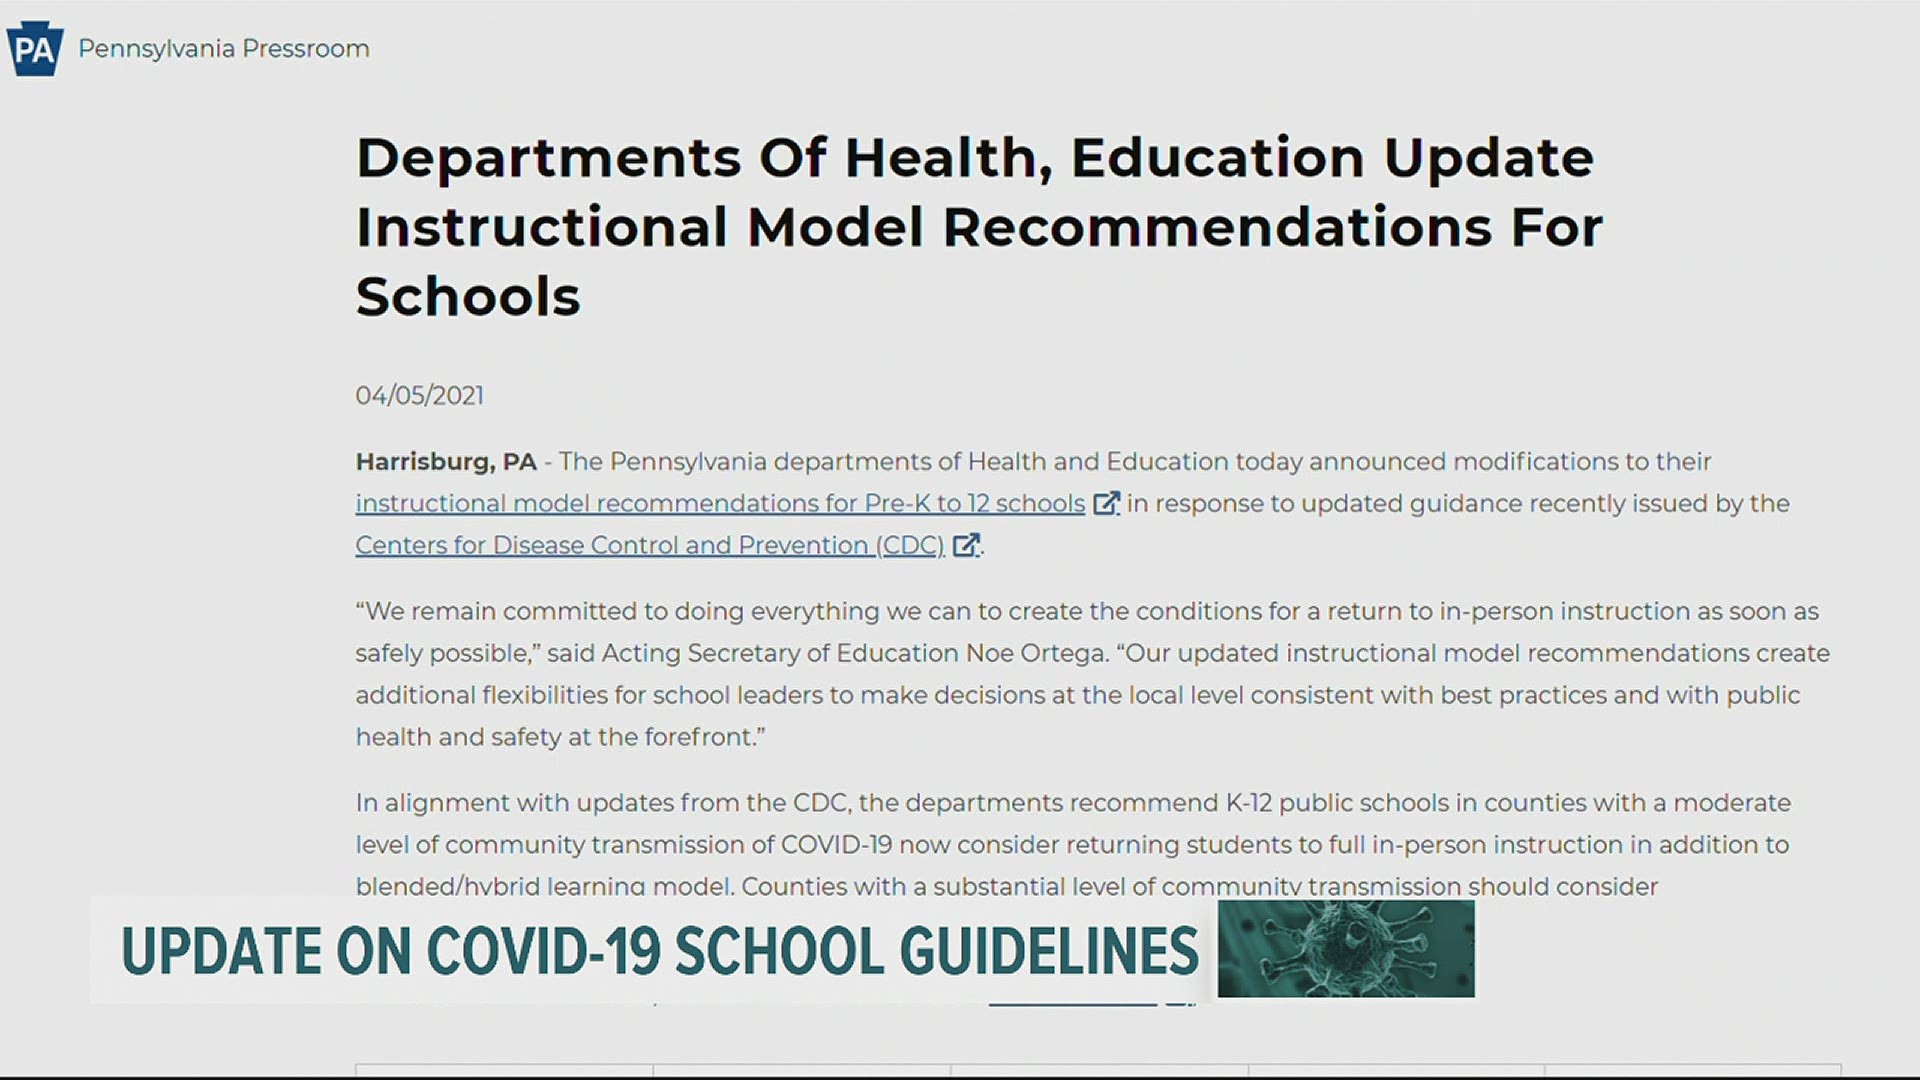 State officials provide more insight into COVID-19 school guidelines